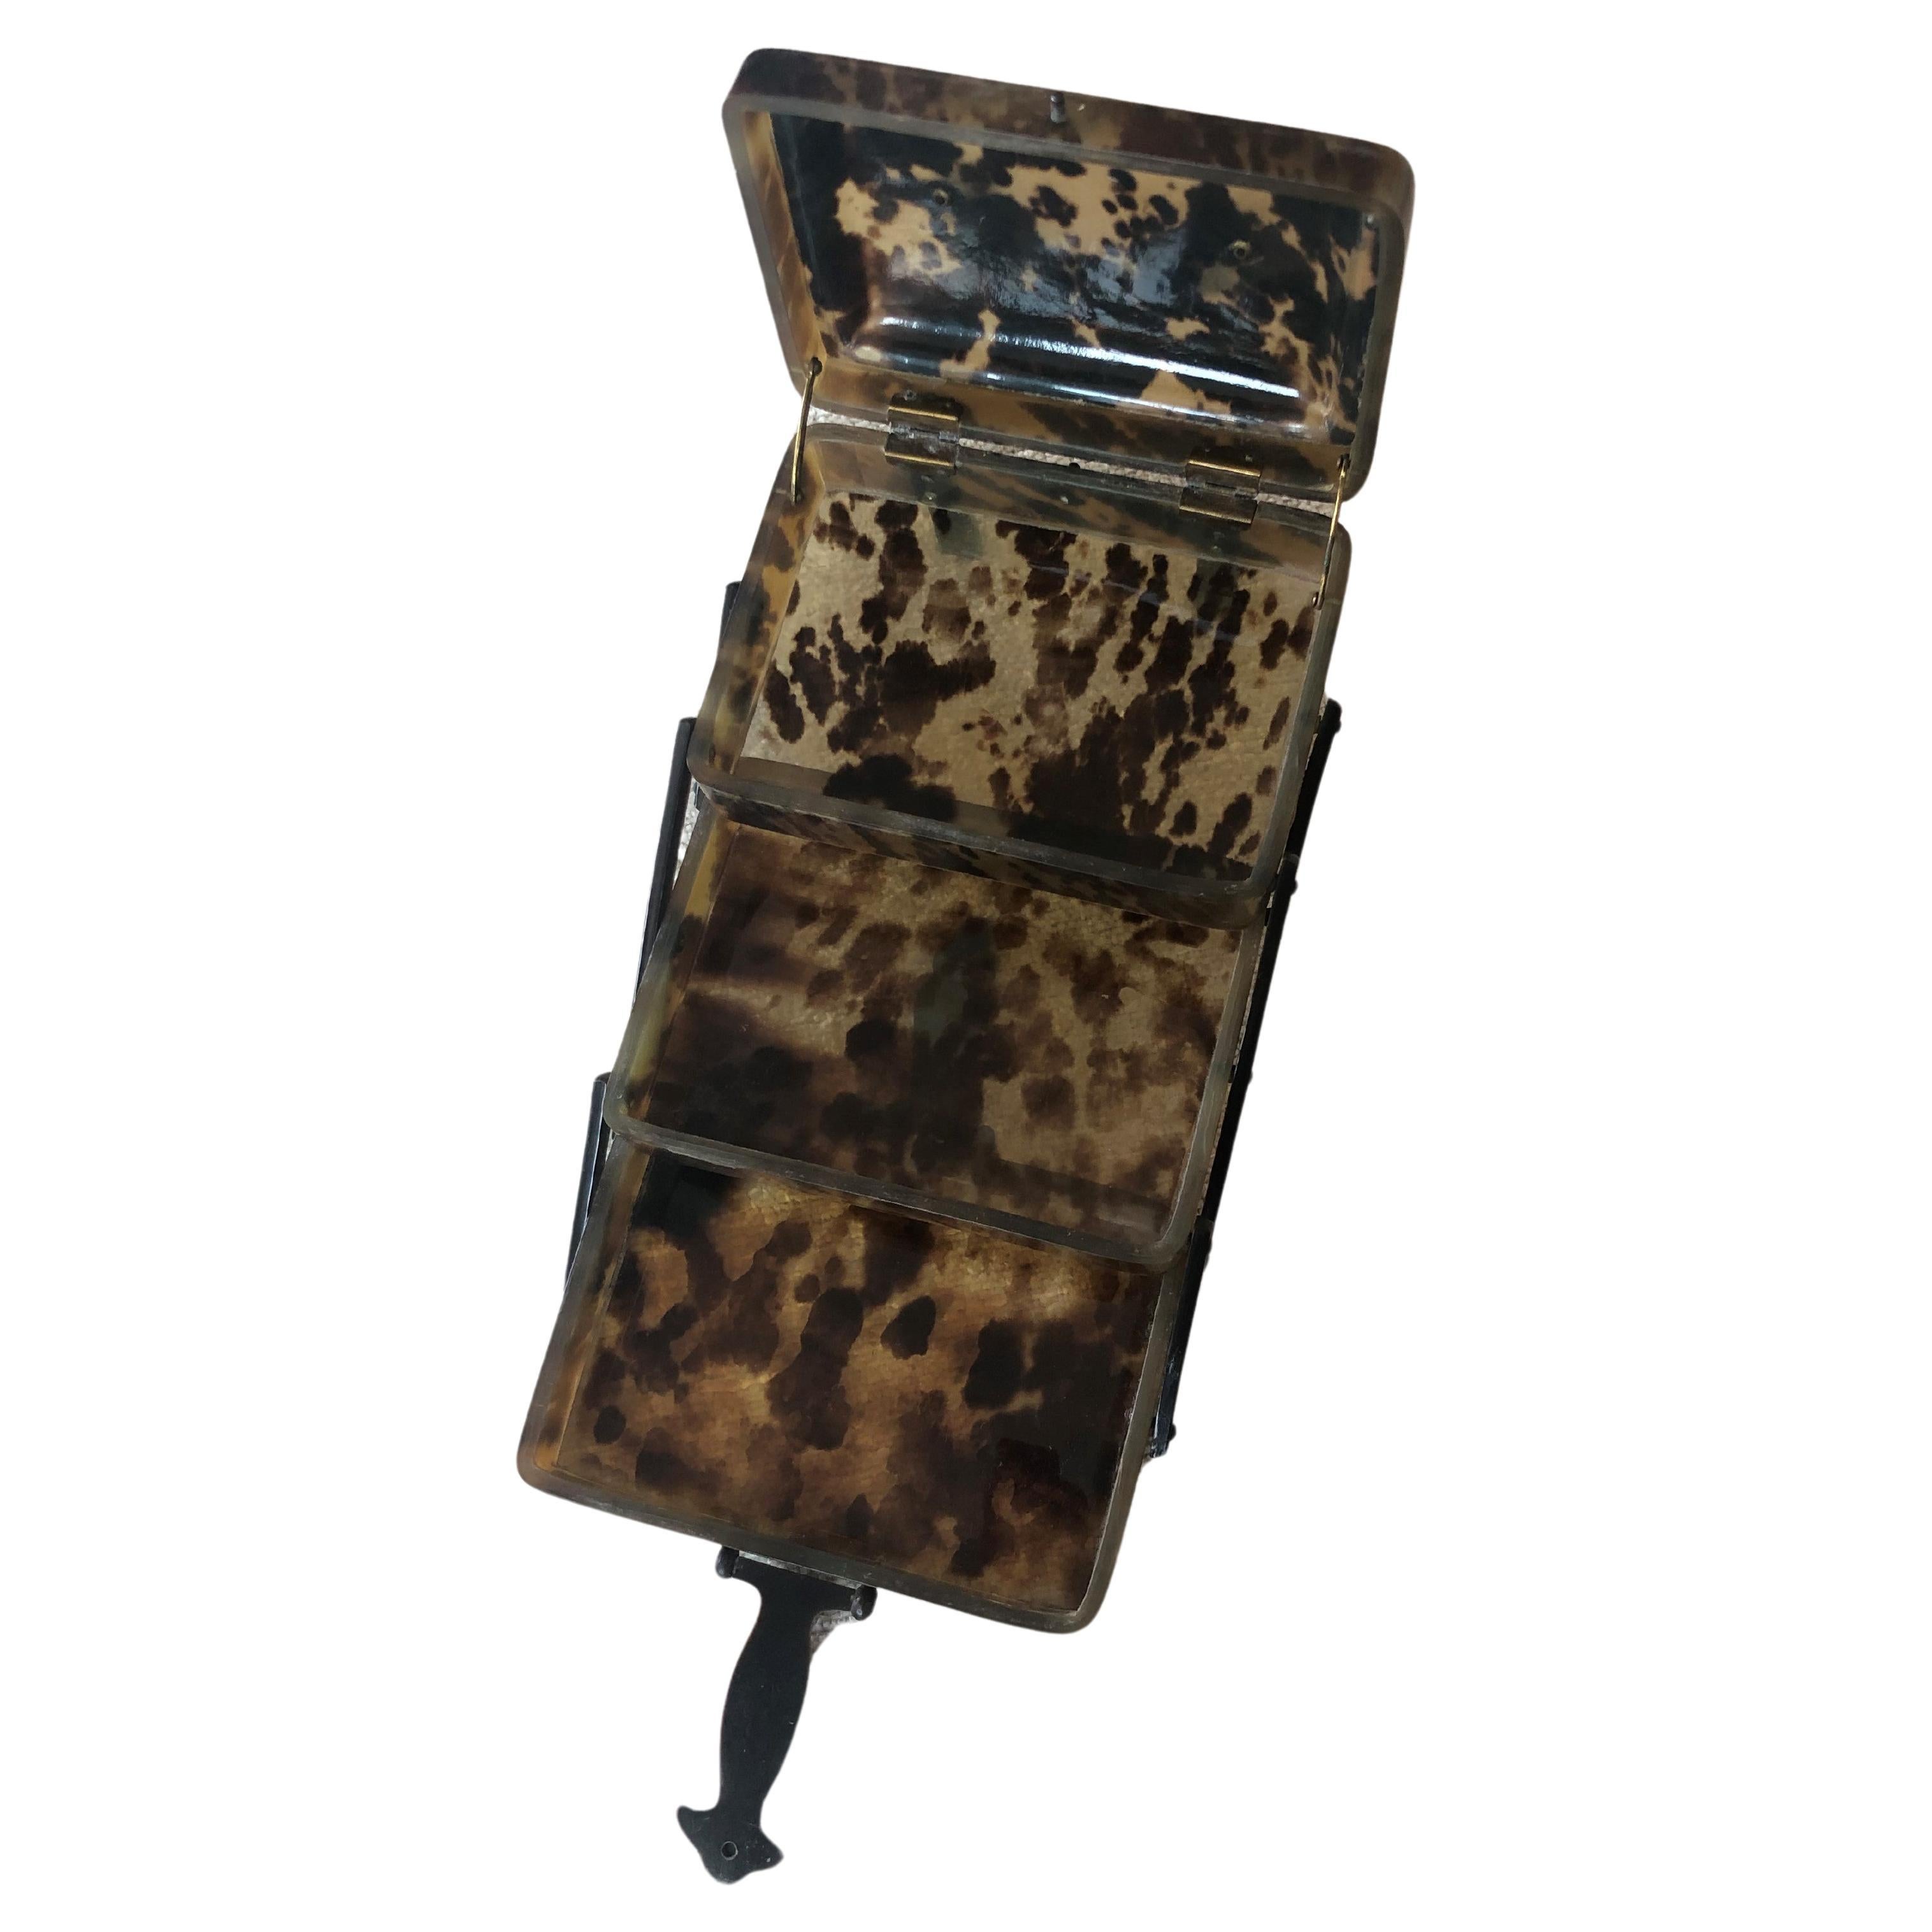 This is a multi layered folding faux tortoise jewelry box with vertical clasps. 
It’s originally from London, and is meant for compartmentalizing jewelry, probably rings for easy access. It has a lovely patina.